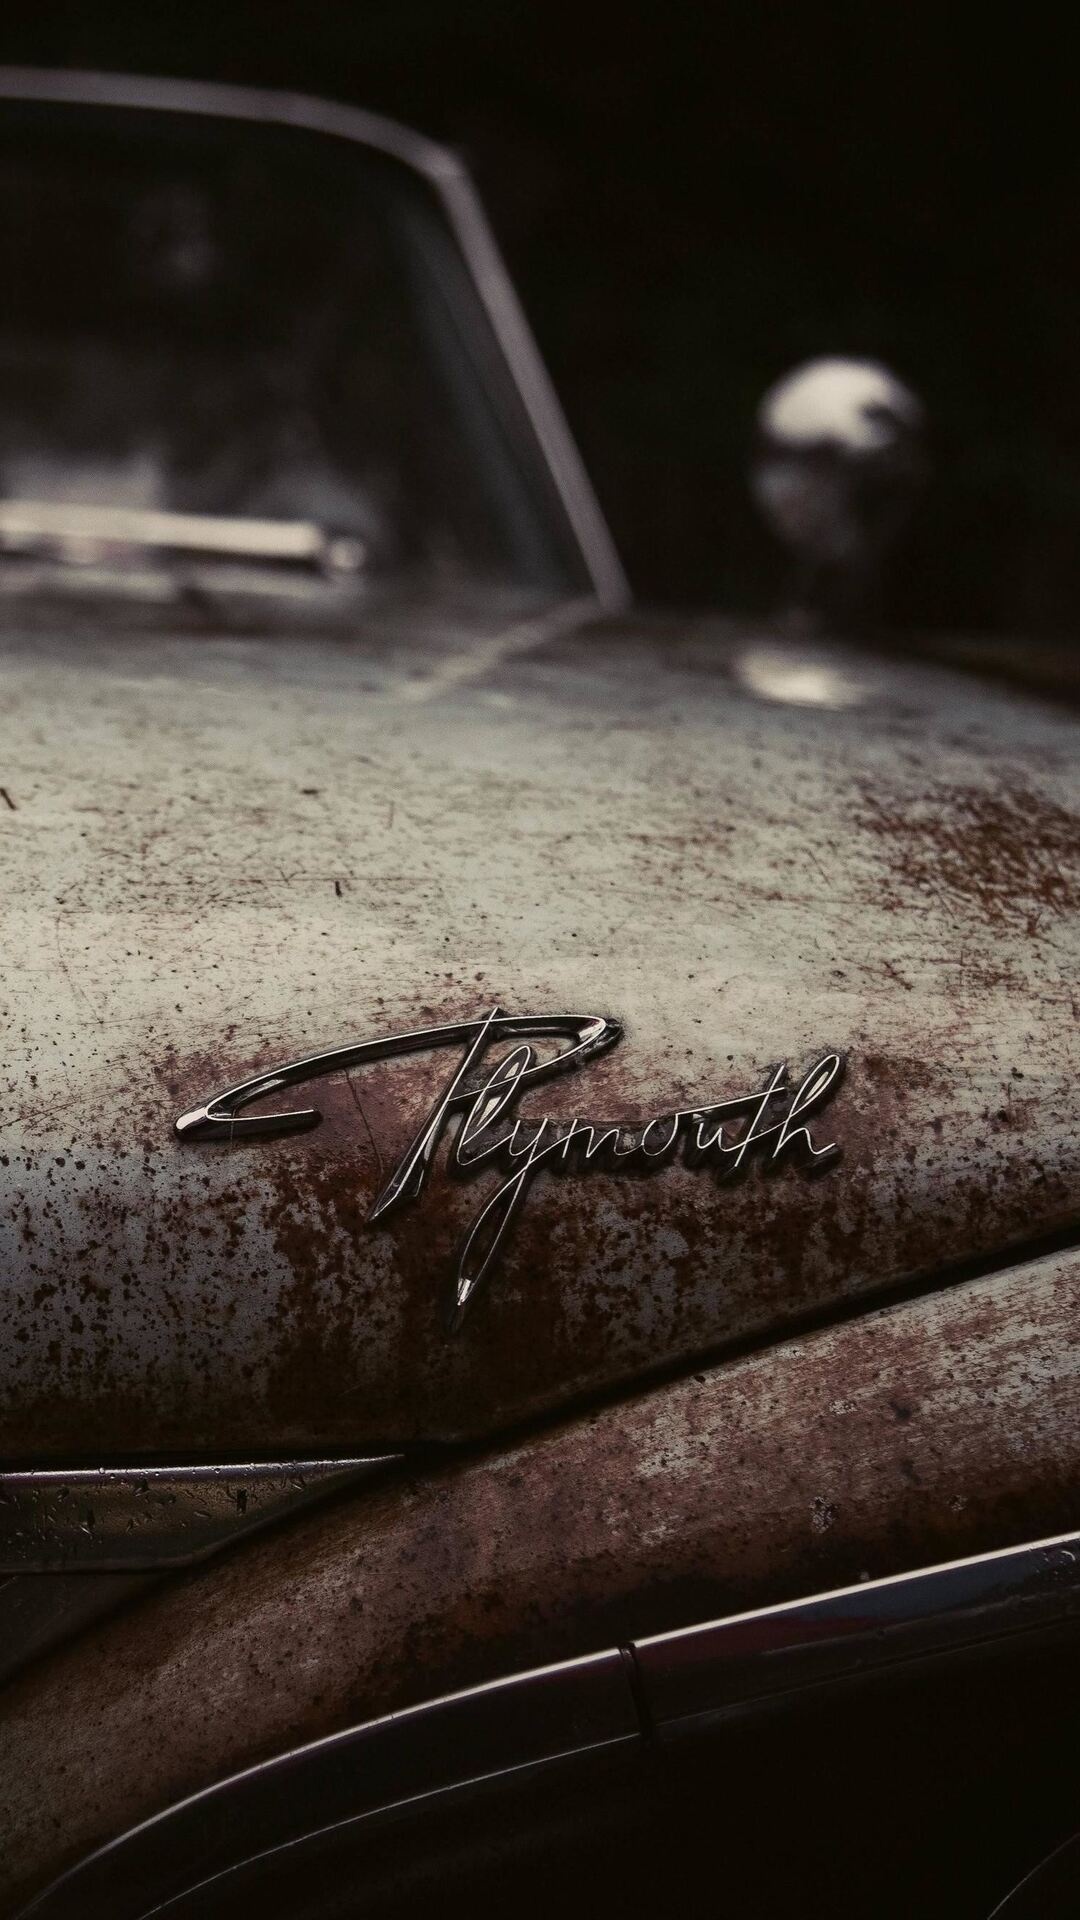 Vintage Car: Plymouth, Preserved automotive heritage, Automobile. 1080x1920 Full HD Wallpaper.